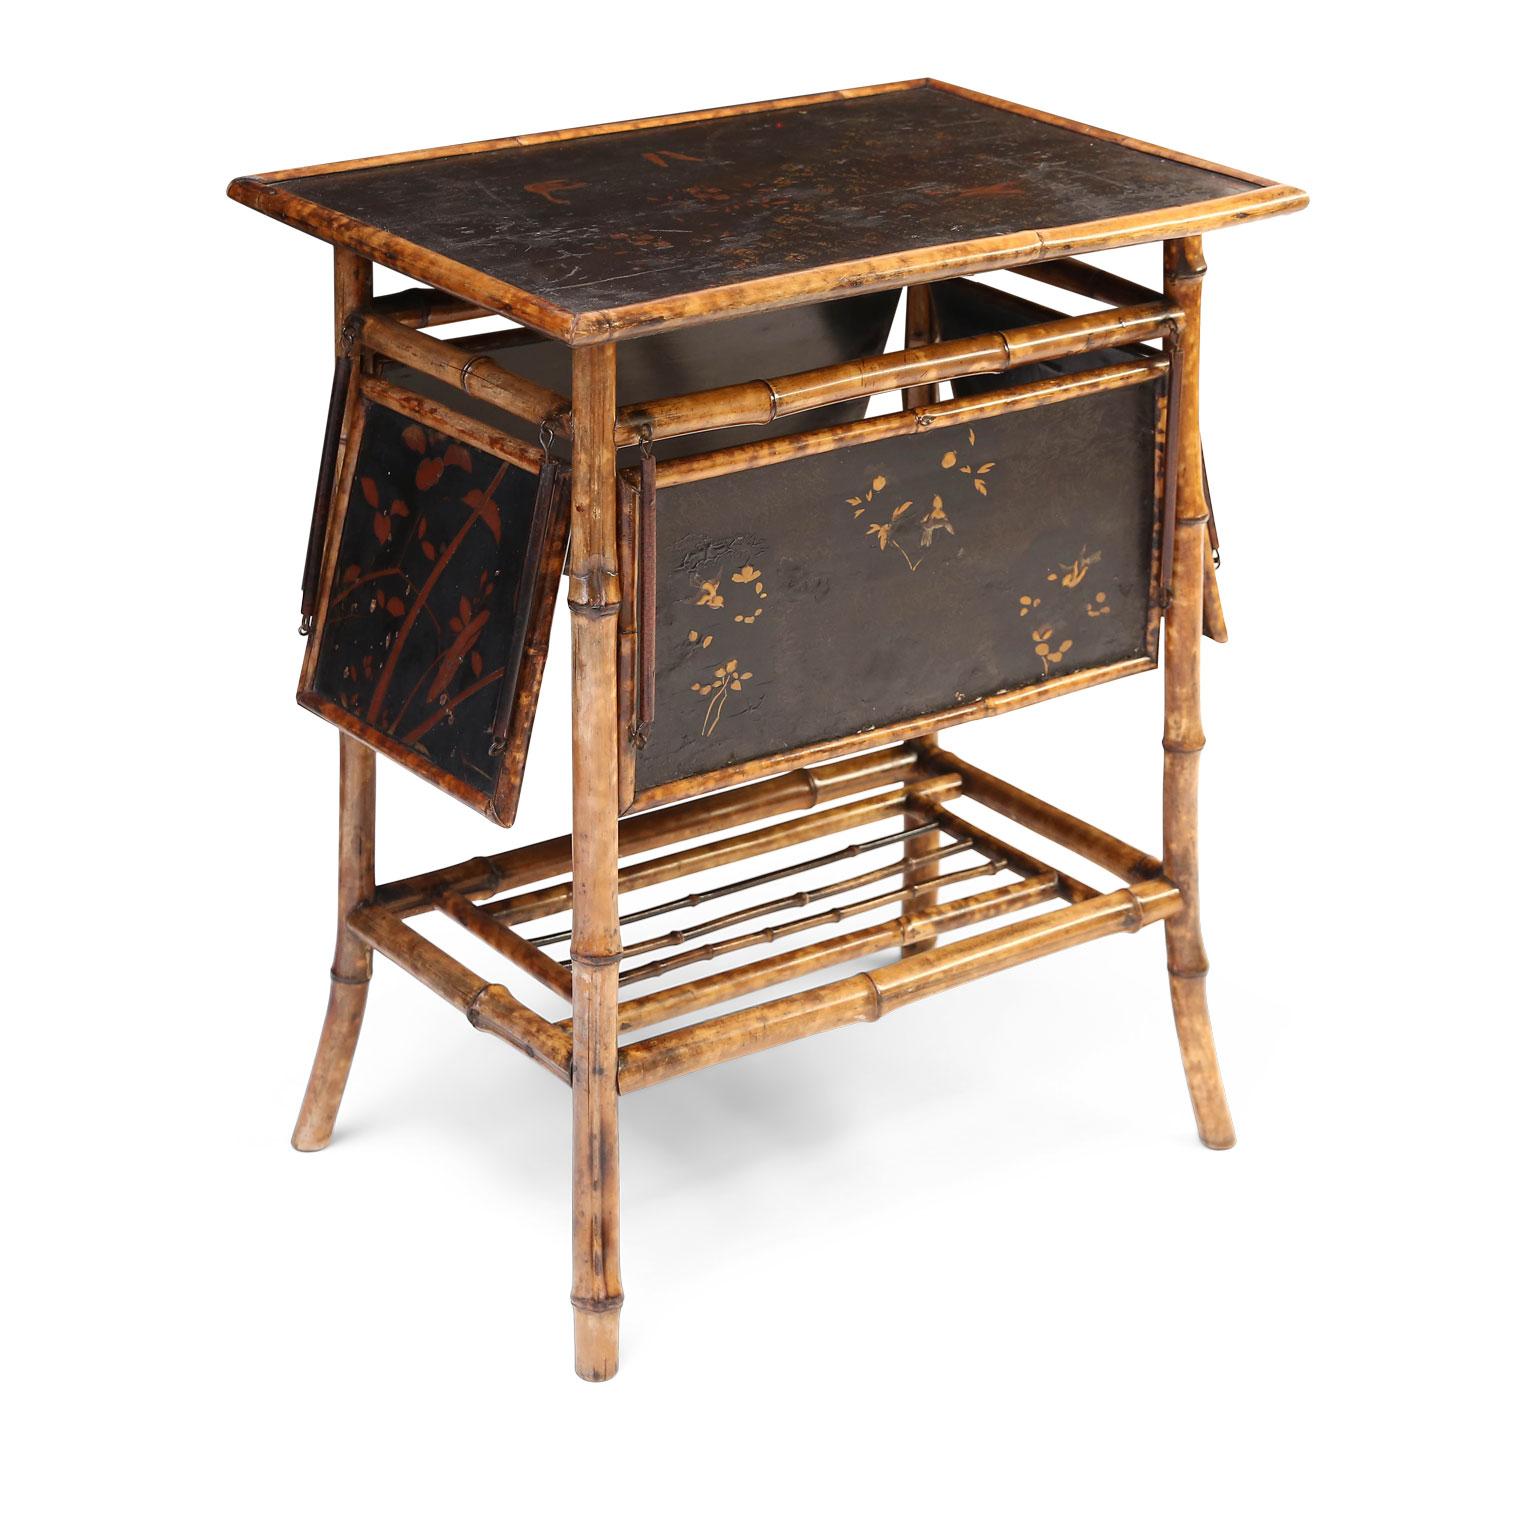 Tortoise shell bamboo dessert table: rectangular shape featuring four drop shelves suspended by springs. Surfaces of top and shelves are adorned by Japanned lacquer scenes of birds, foliage and blossoms tinted in oxblood red on black.